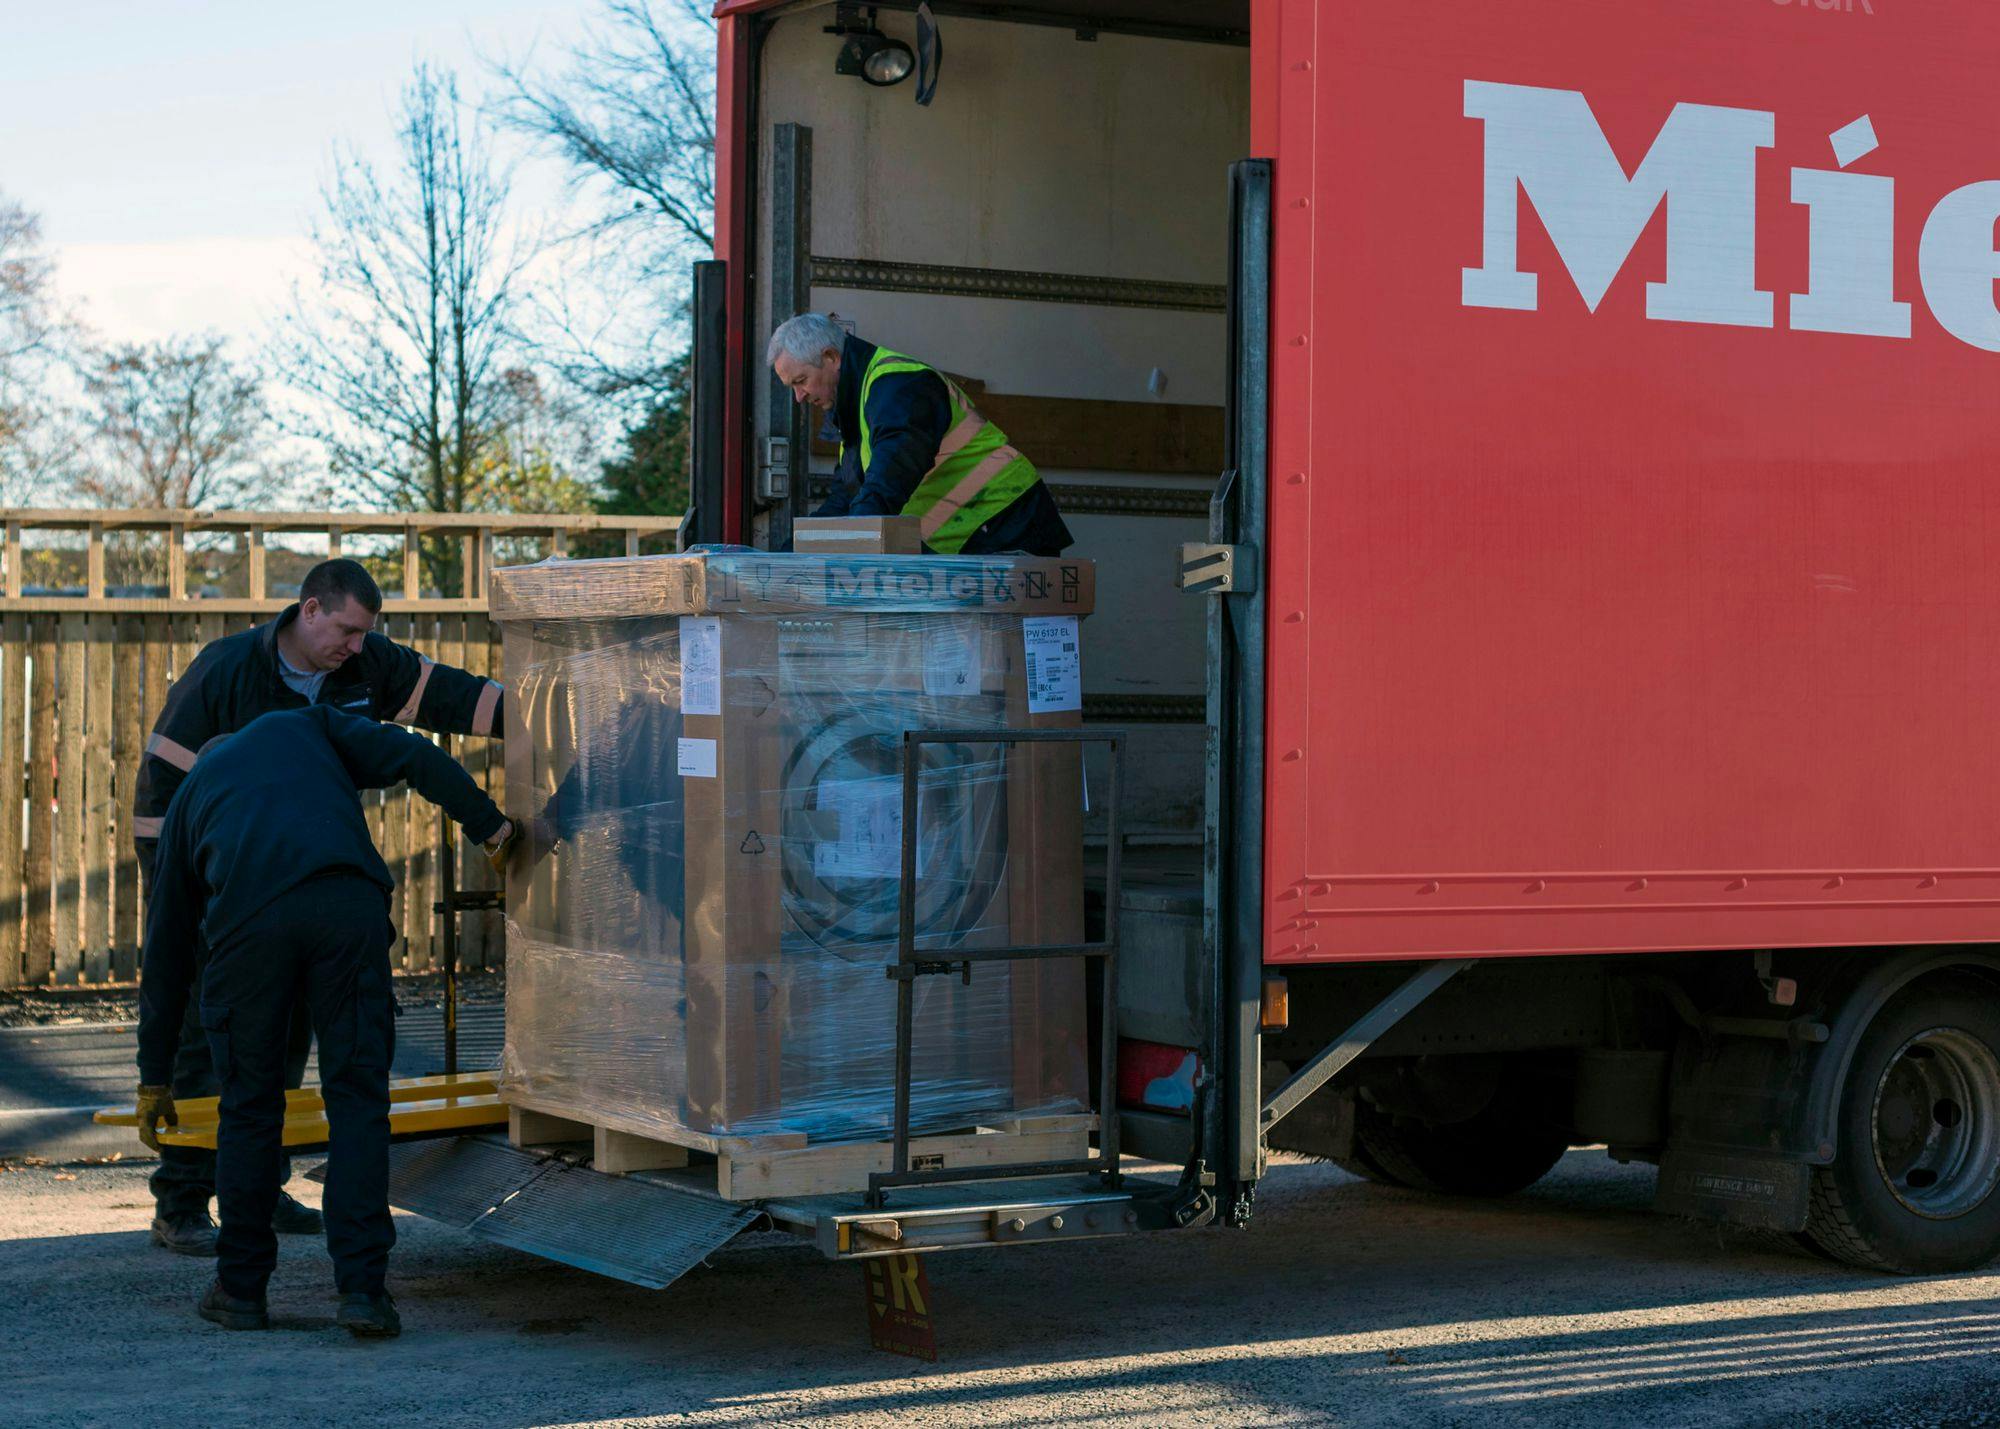 Forbes Professional Engineers Unloading Miele Professional Washing Machines.